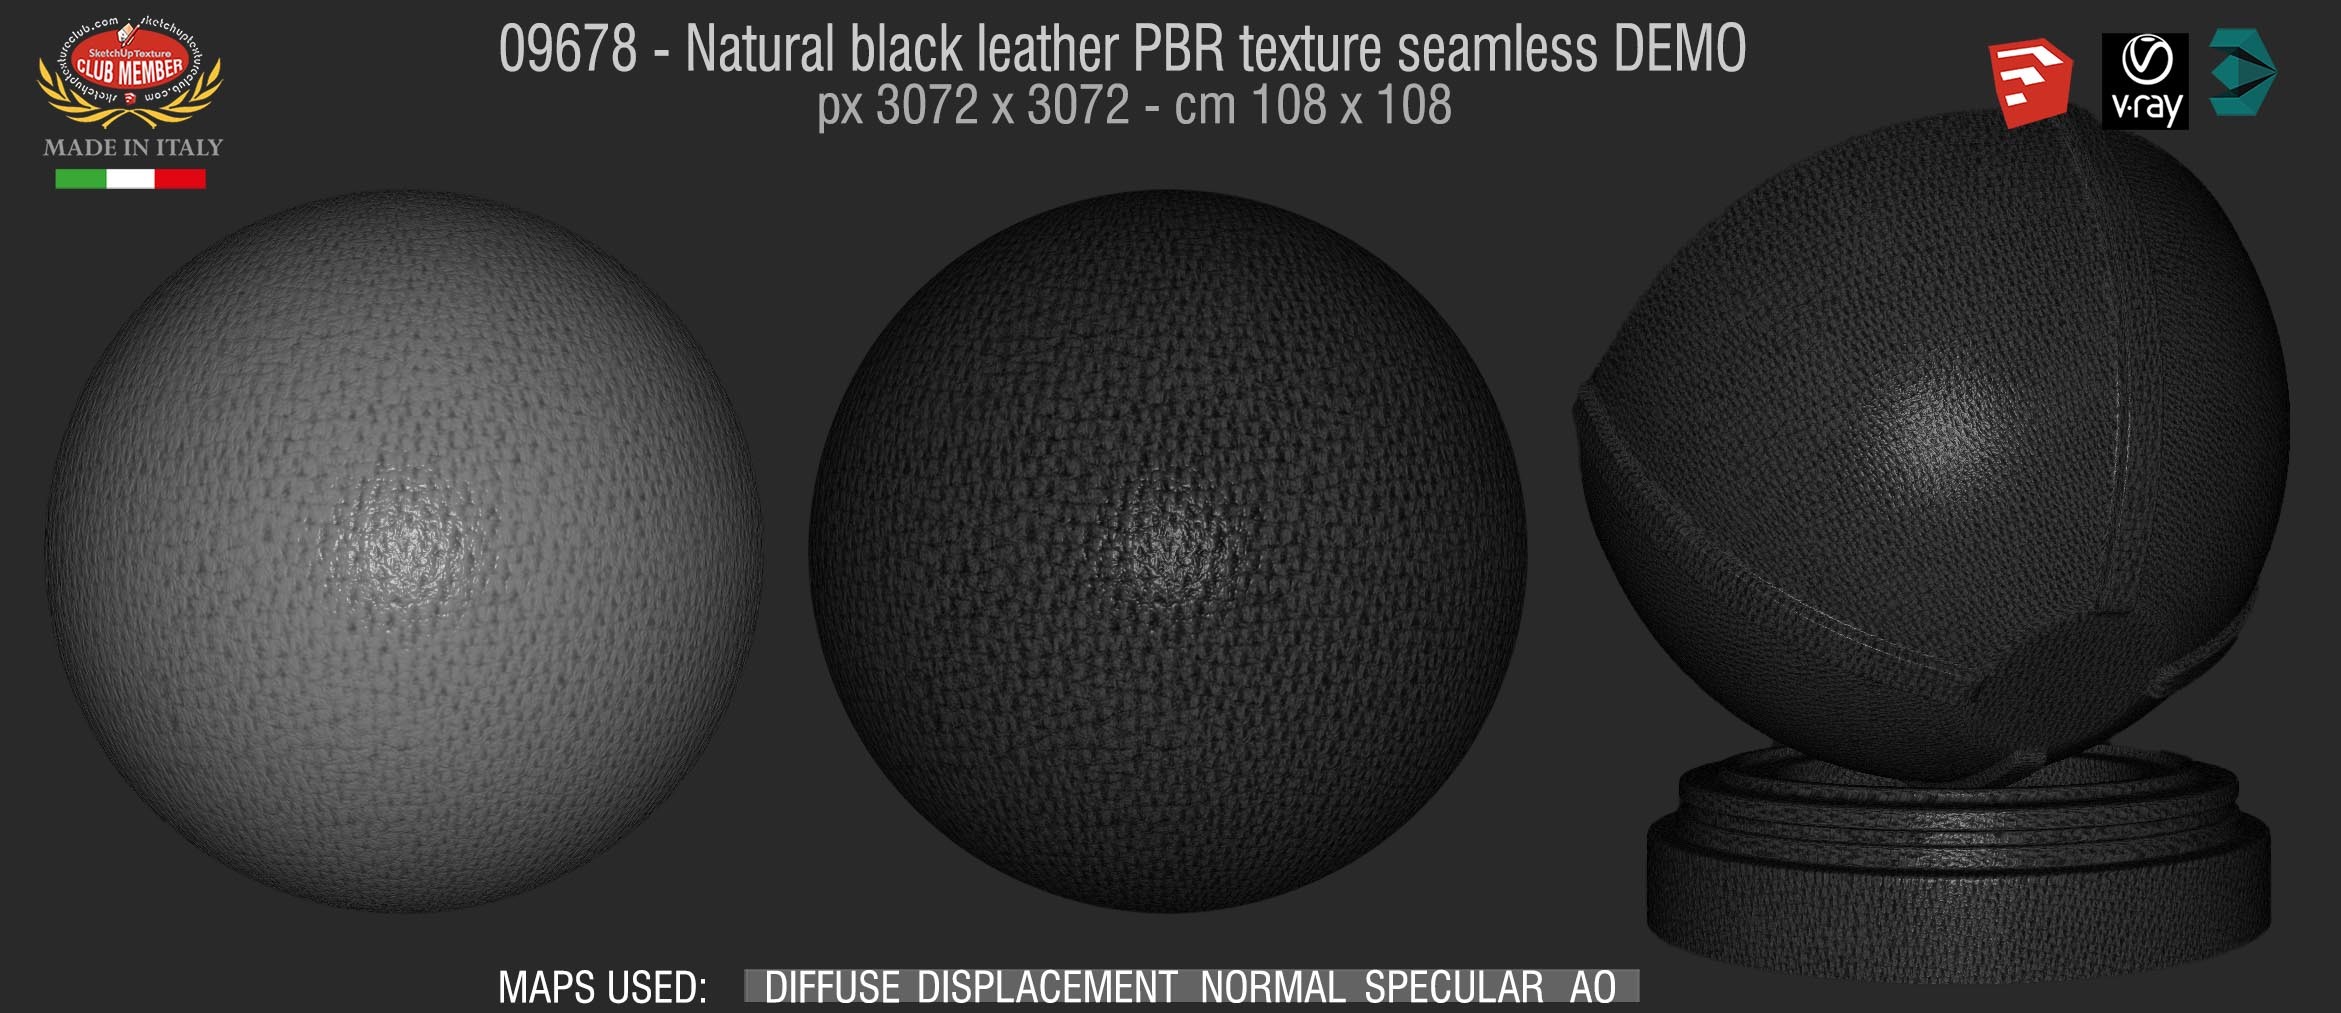 09678 Natural black leather PBR texture seamless DEMO